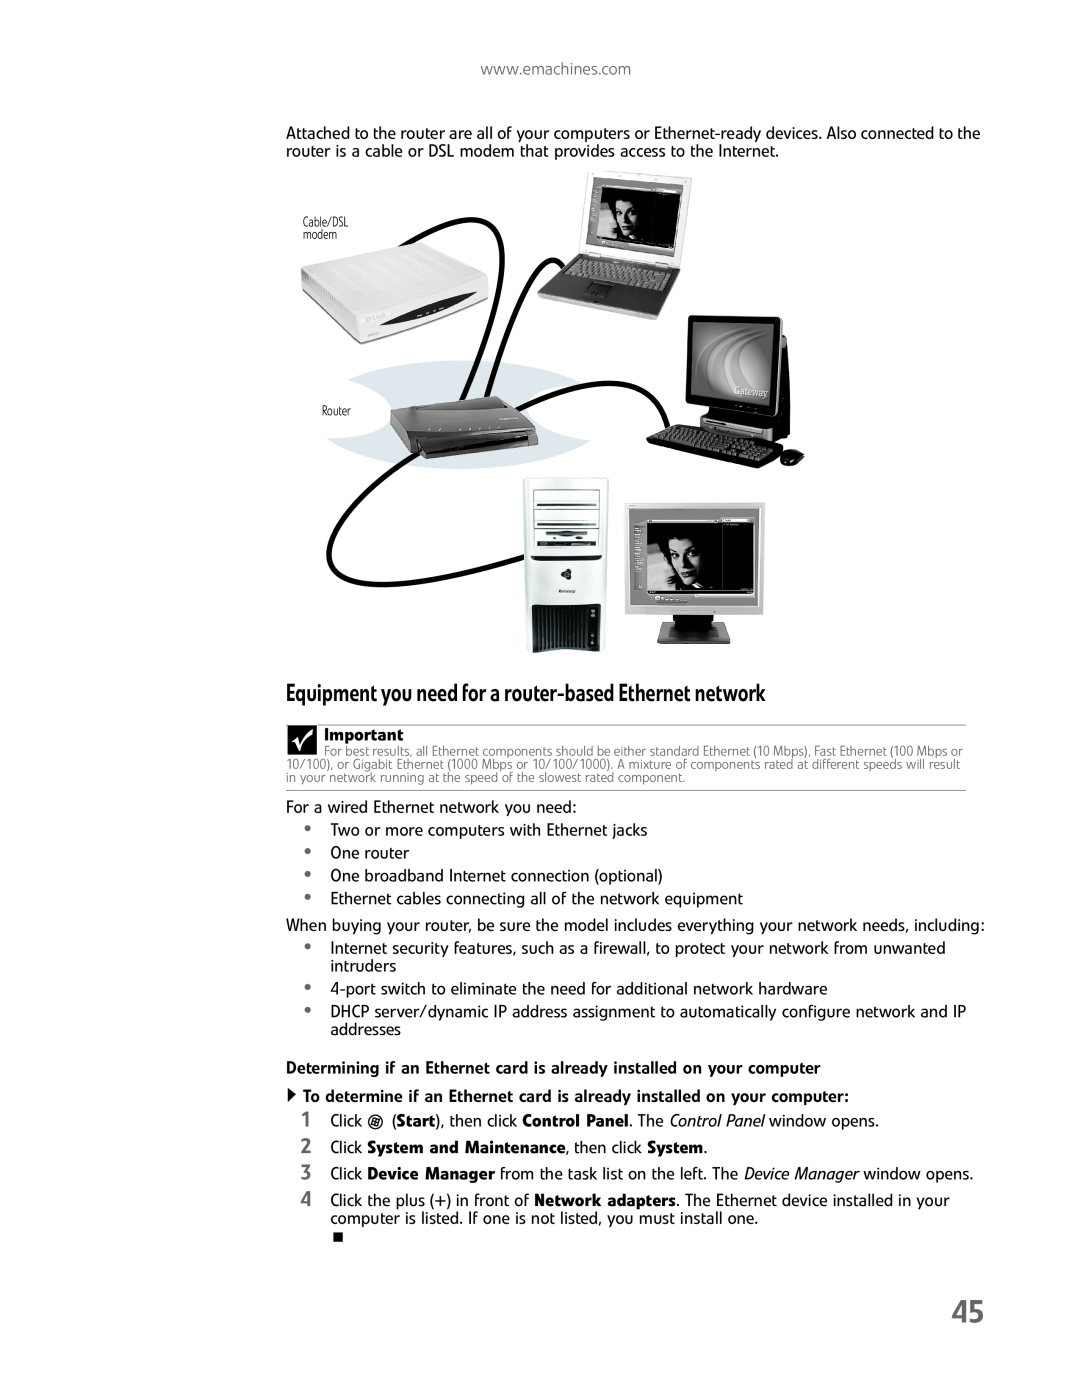 eMachines EL1200 Series manual Equipment you need for a router-based Ethernet network 